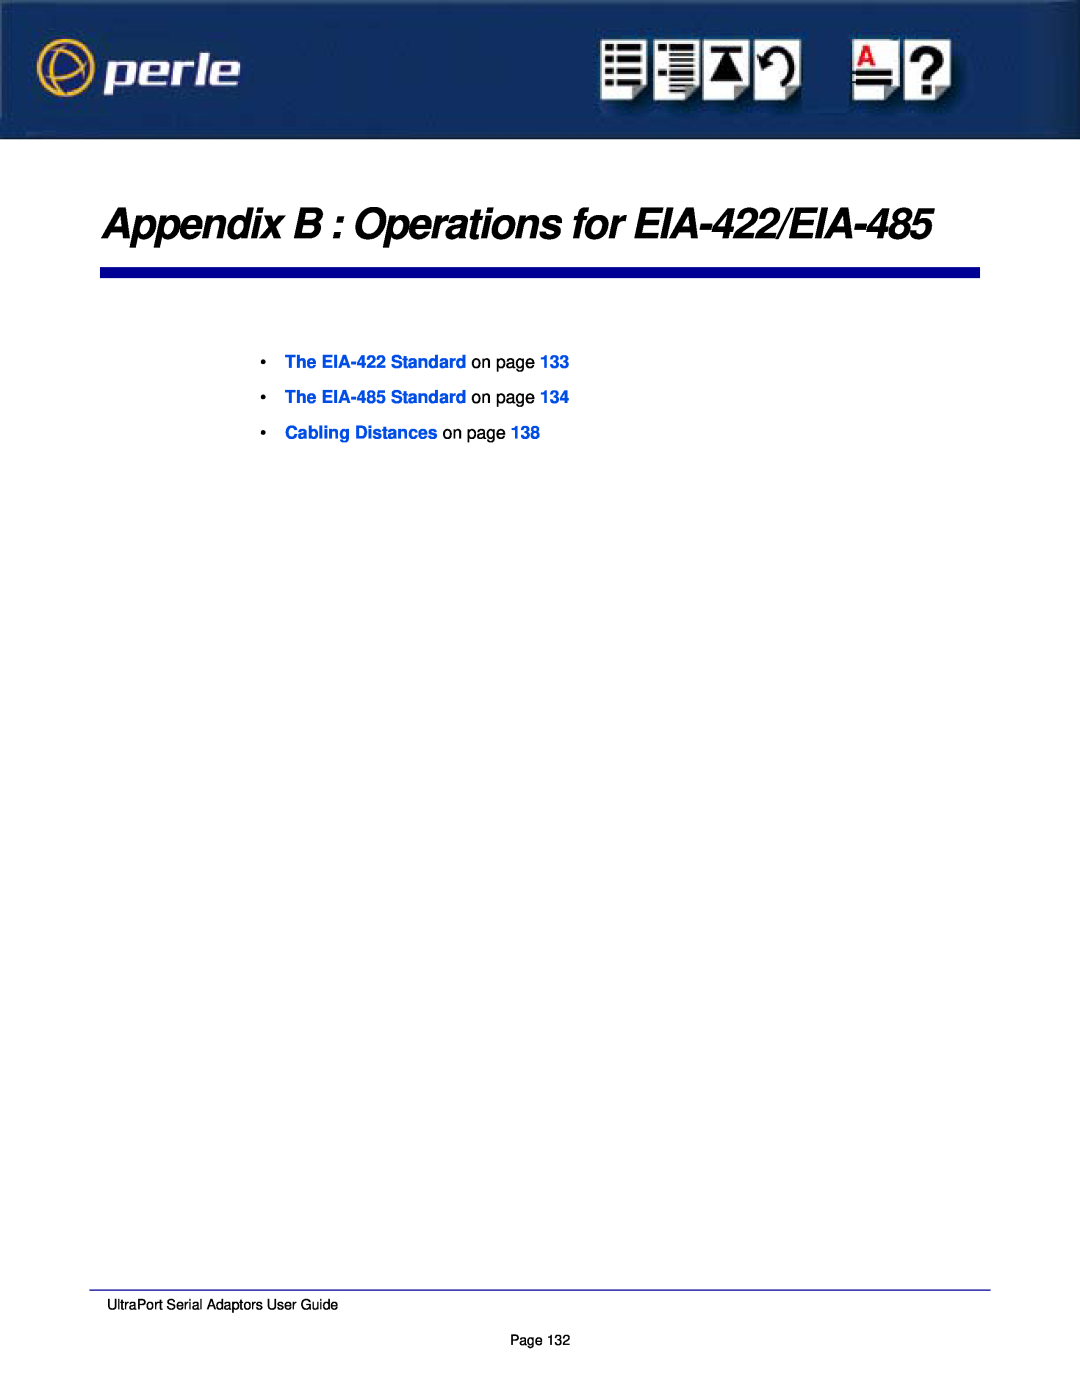 Perle Systems 5500152-23 manual Appendix B Operations for EIA-422/EIA-485, Cabling Distances on page 